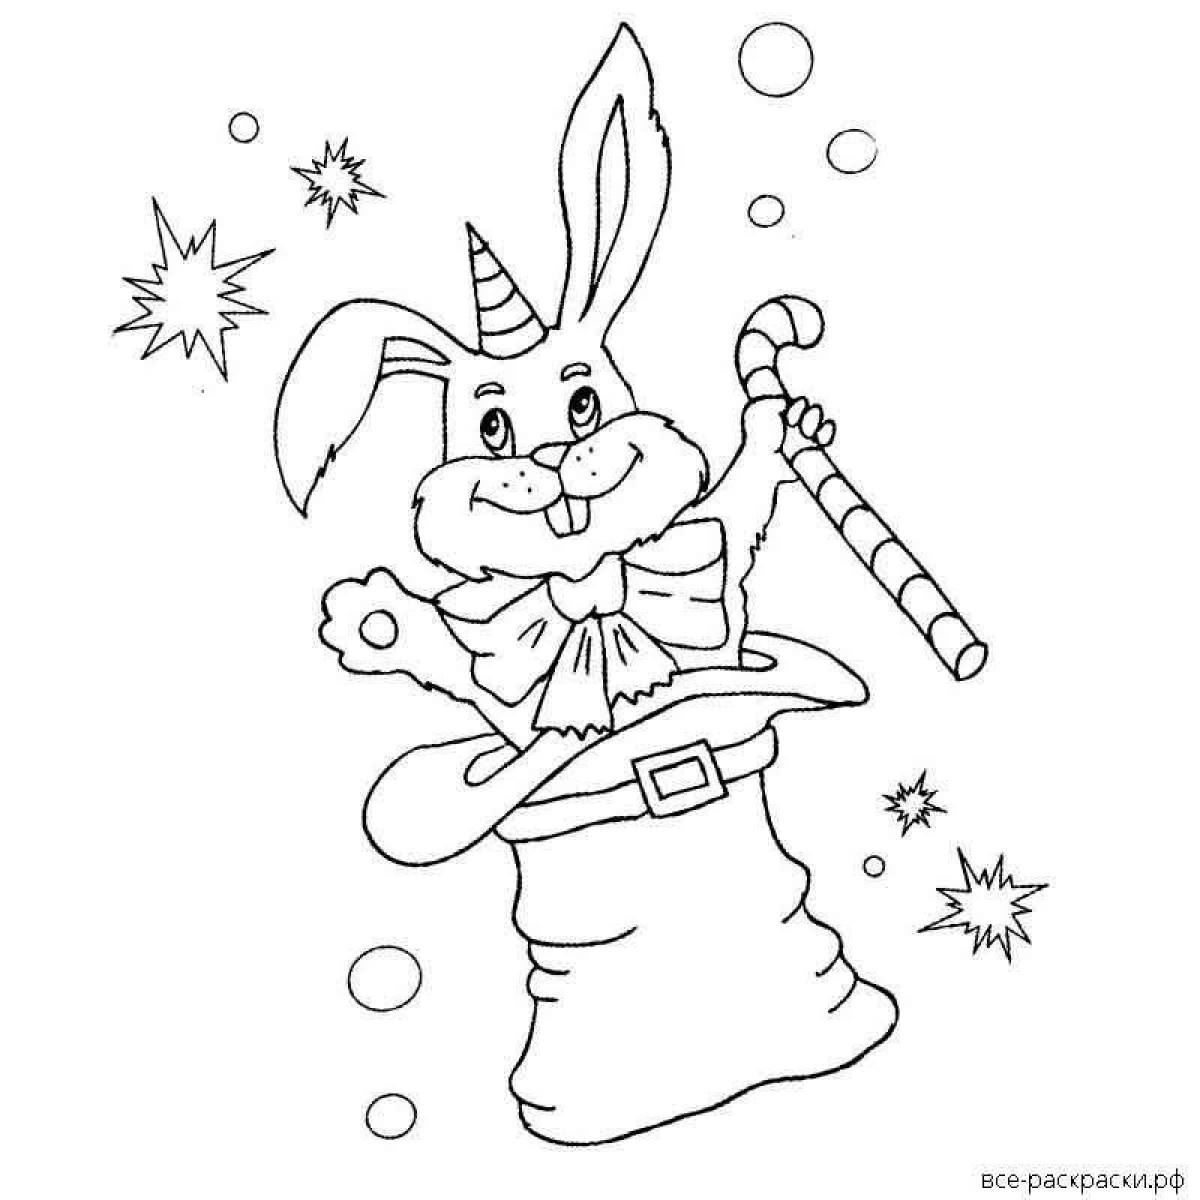 Playful coloring bunny new year